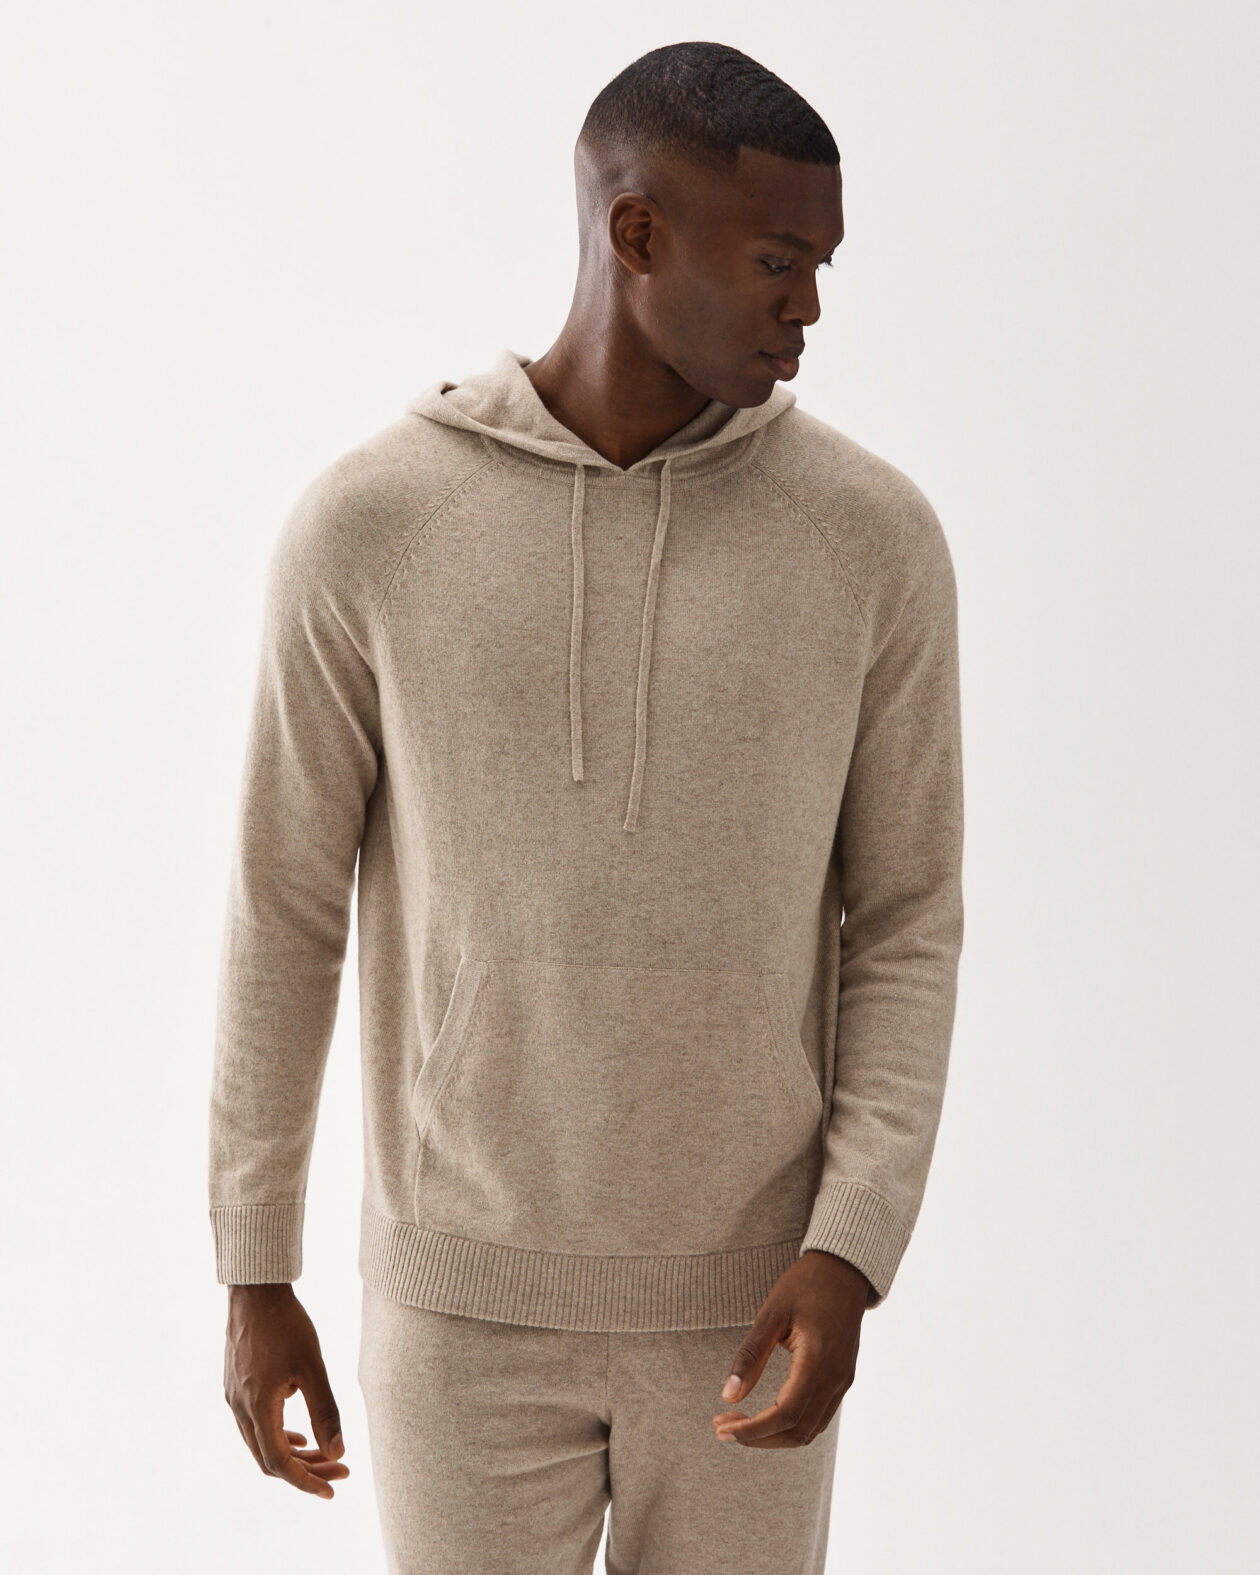 Leisure Hood Baby Cashmere Sweater Sand